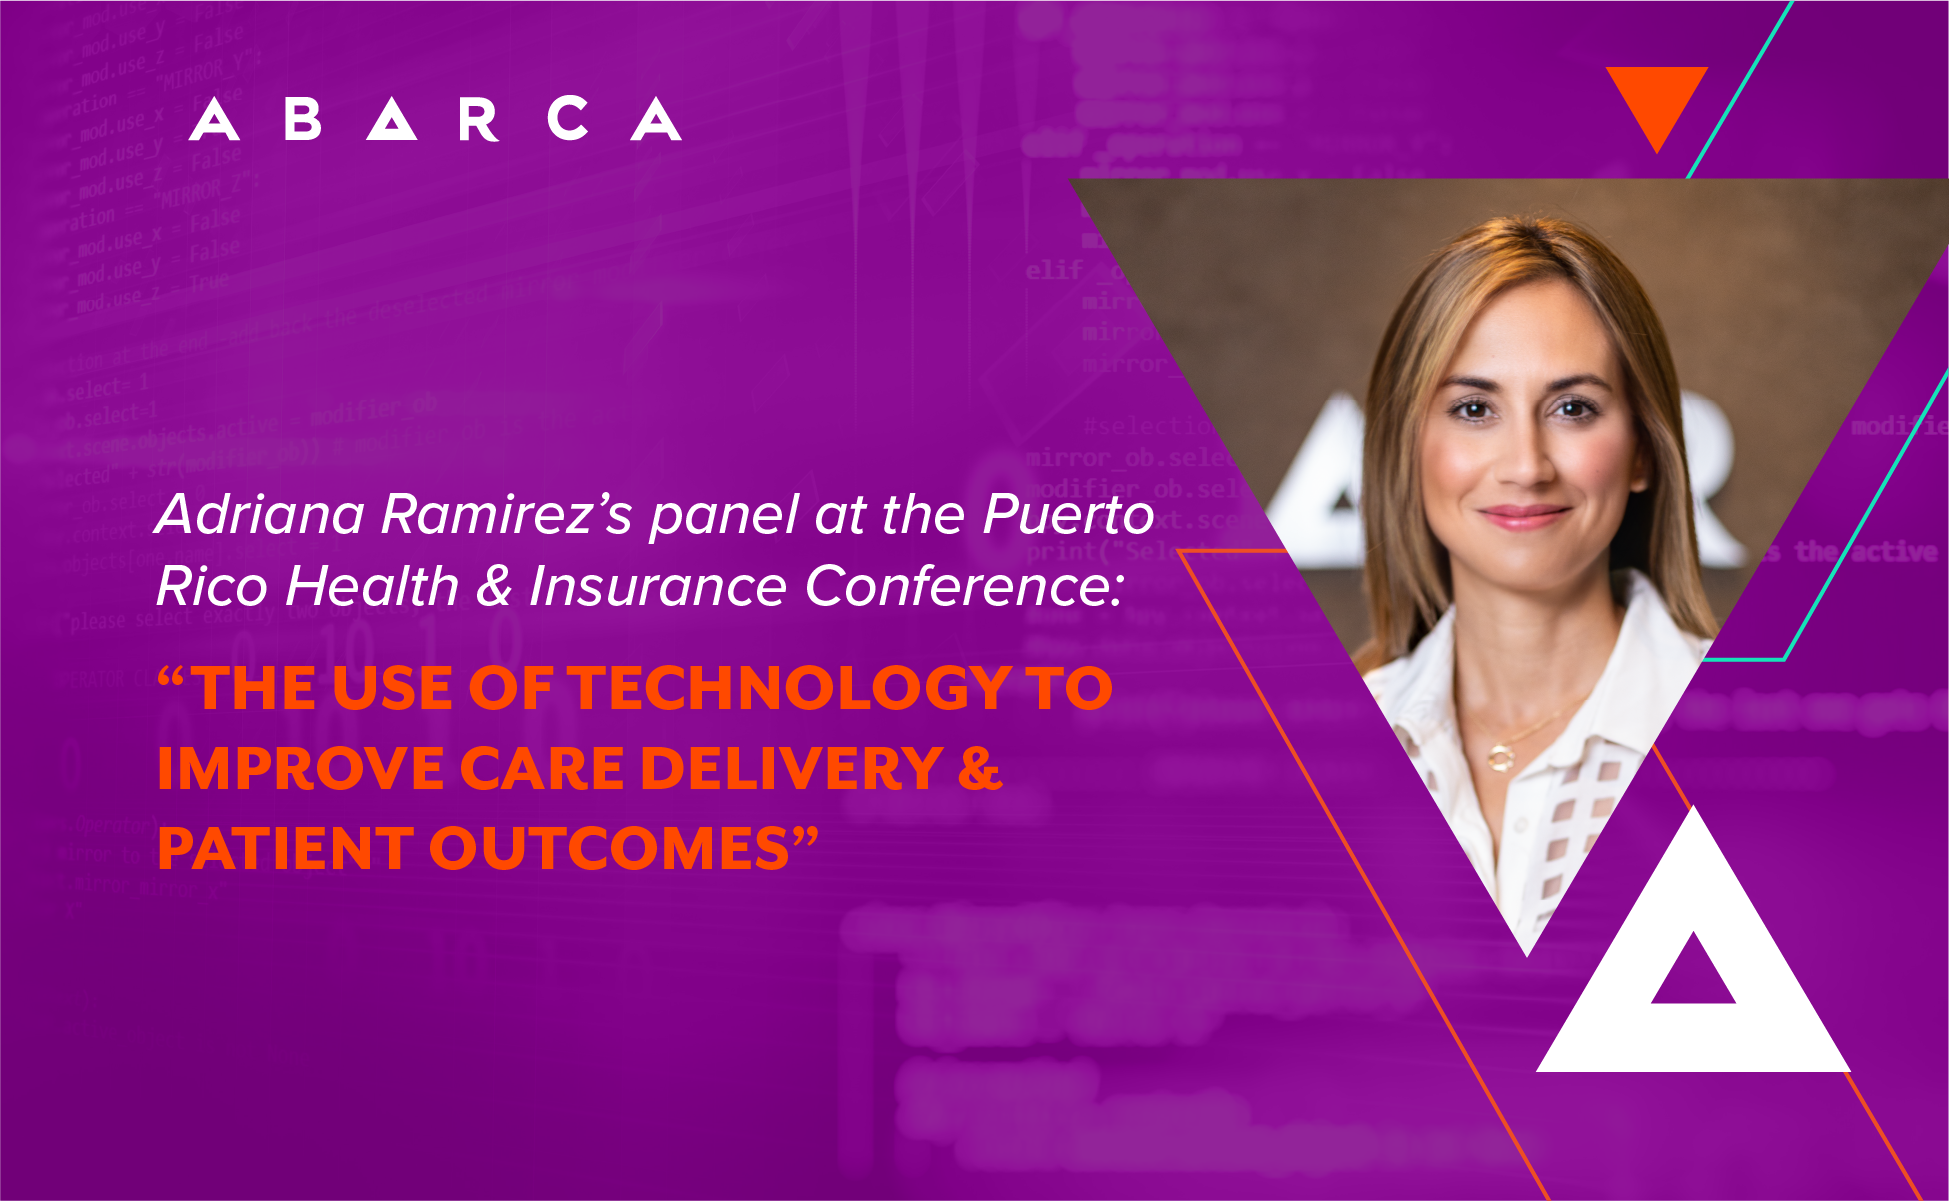 Abarca Health: Looking back at the Puerto Rico Health & Insurance Conference